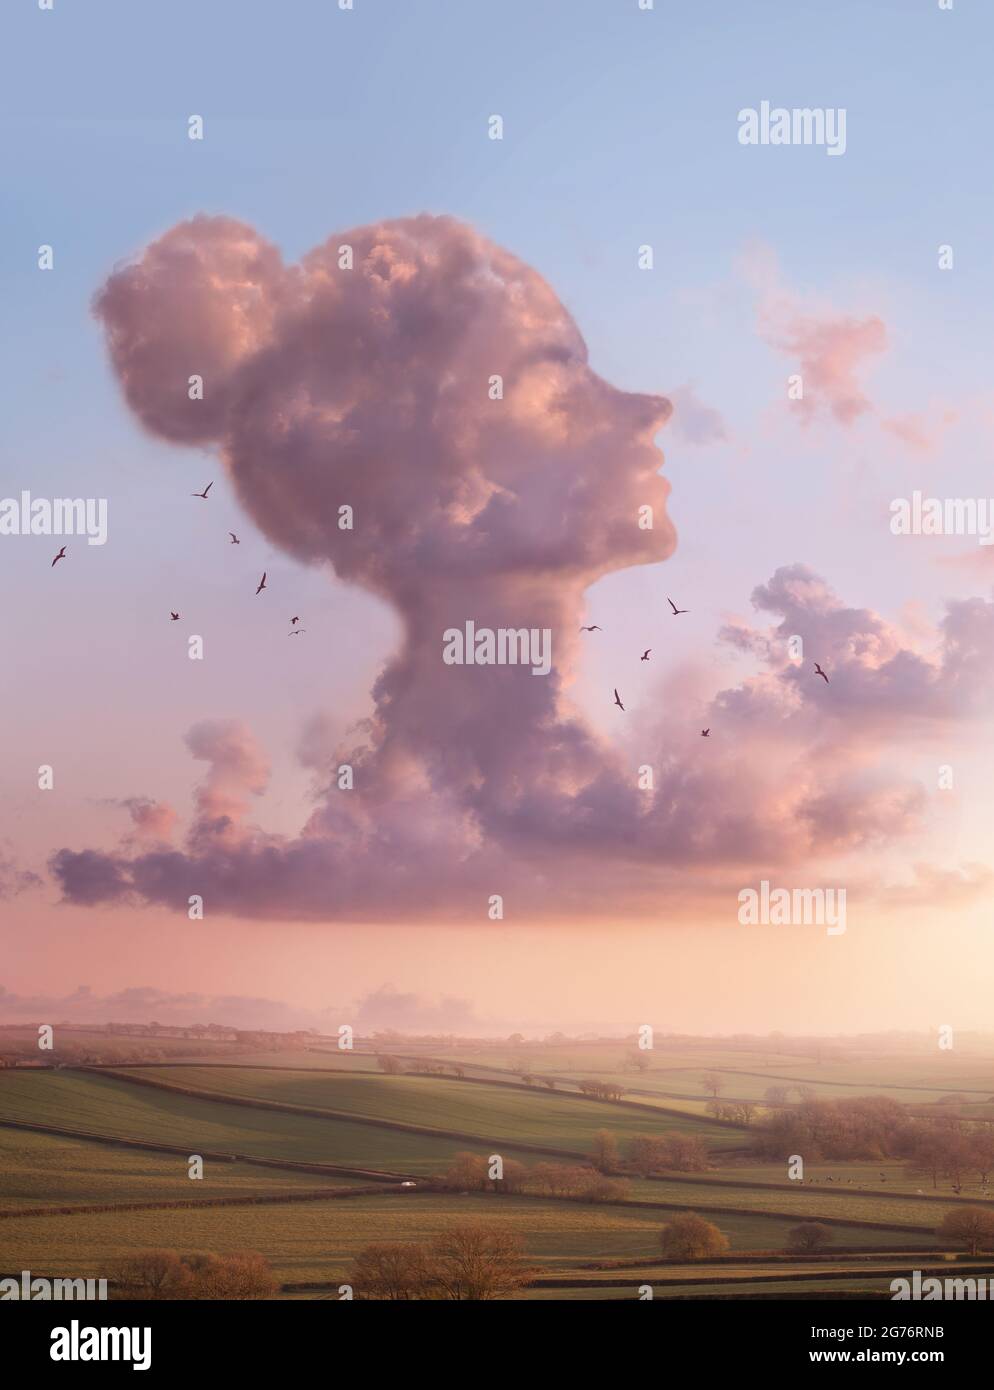 A lady in the clouds -  Womens head shaped cloud on a landscape sunset scenic. thinking and mindful conceptual Illustration. Stock Photo